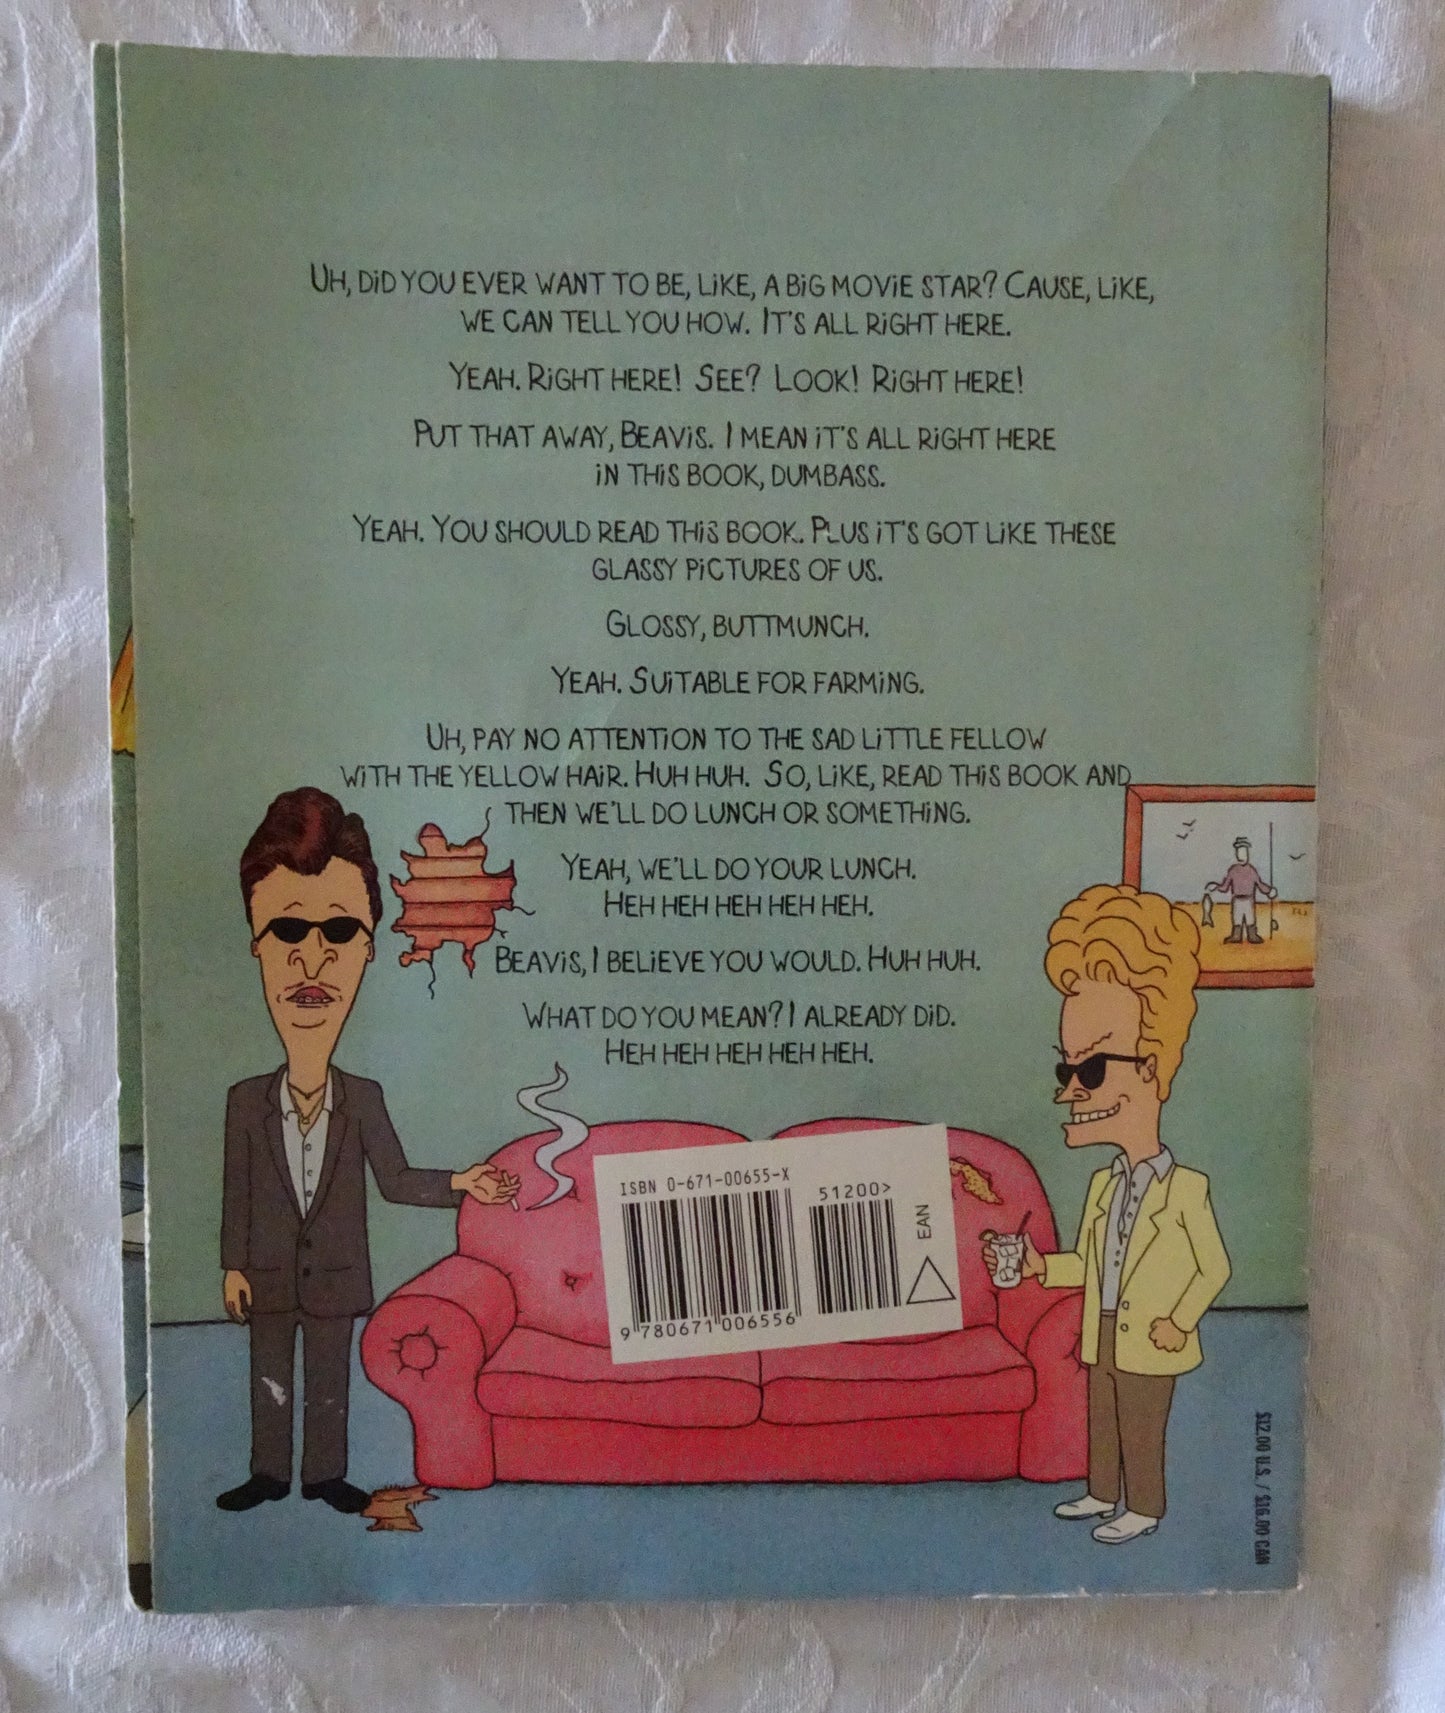 Huh Huh for Hollywood by Mike Judge and Larry Doyle